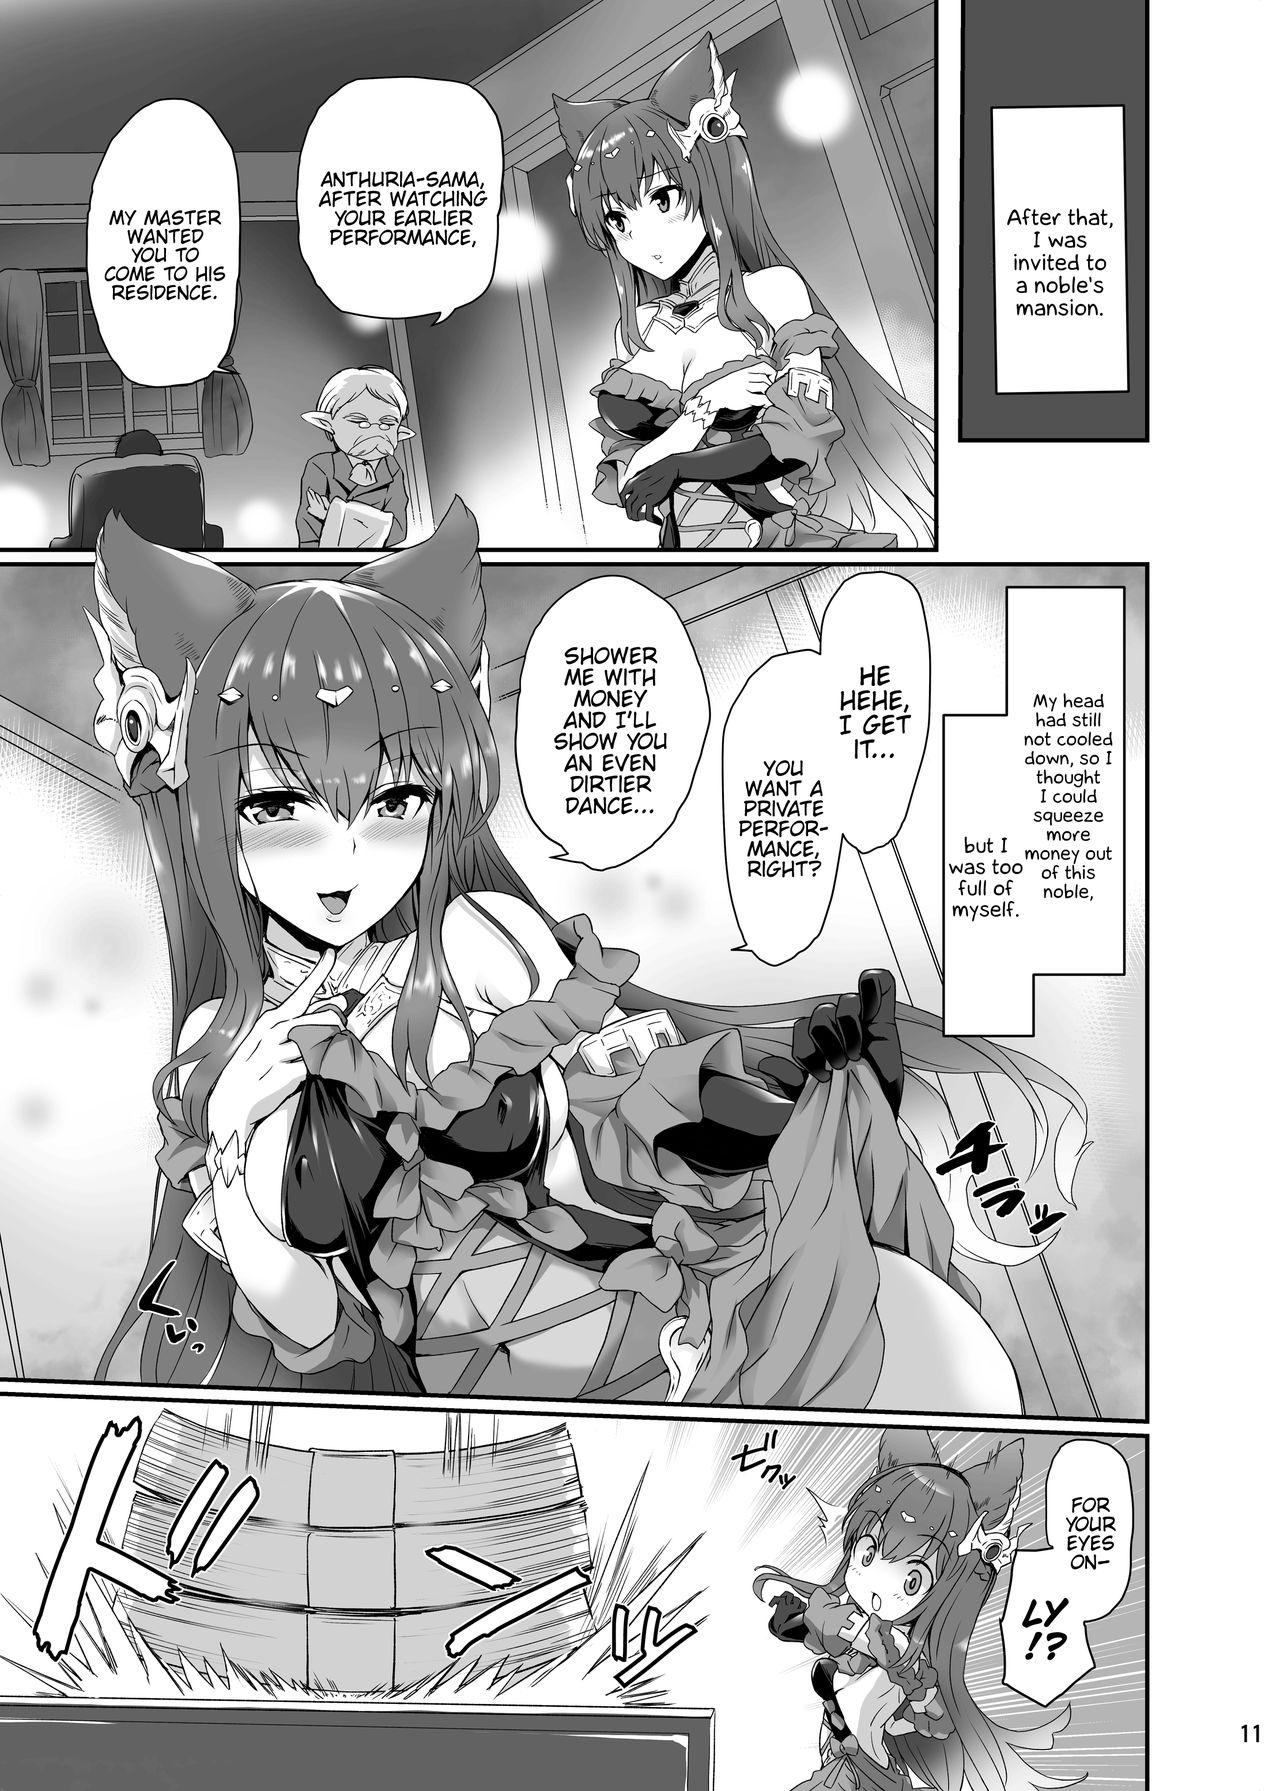 Hot Teen Anthuria - Granblue fantasy Gostoso - Page 11